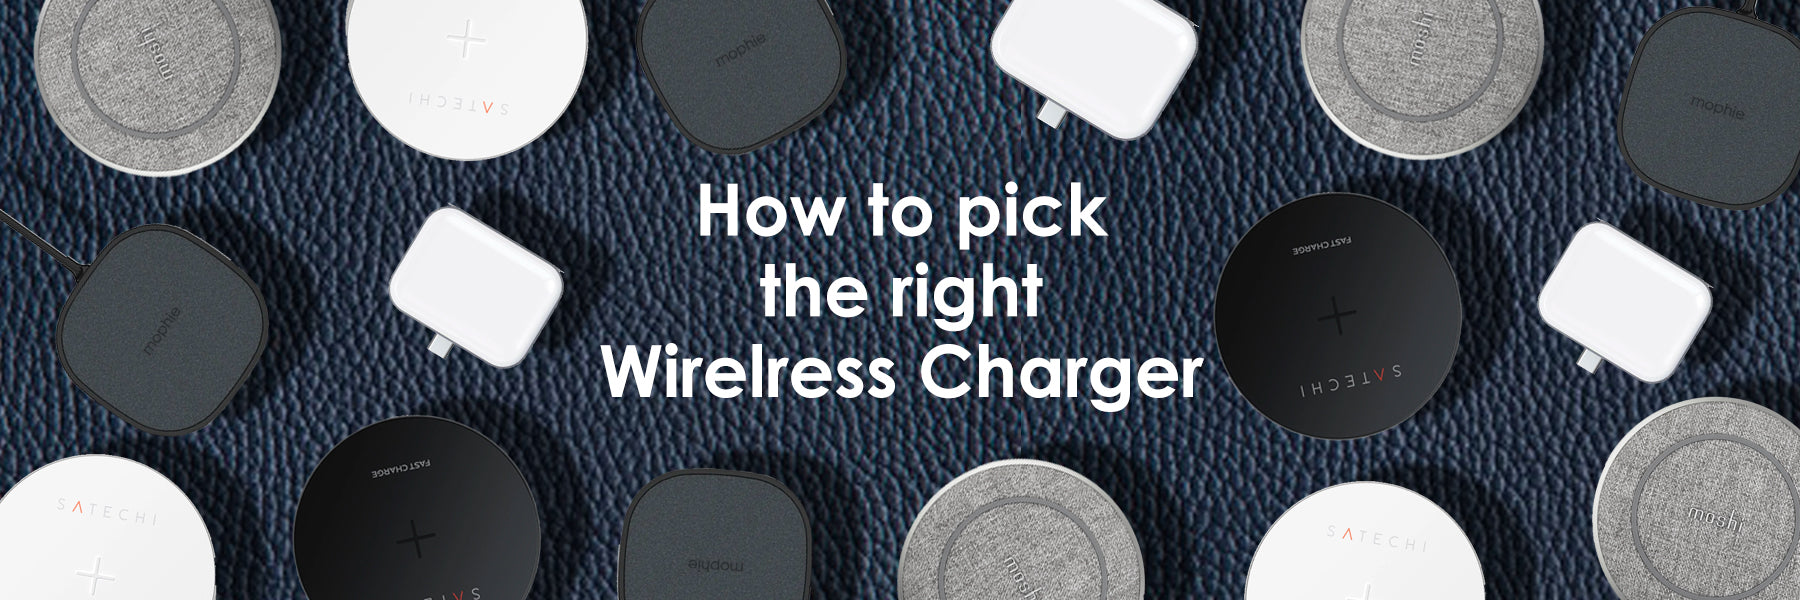 Tangled trying to decide on a wireless charger?